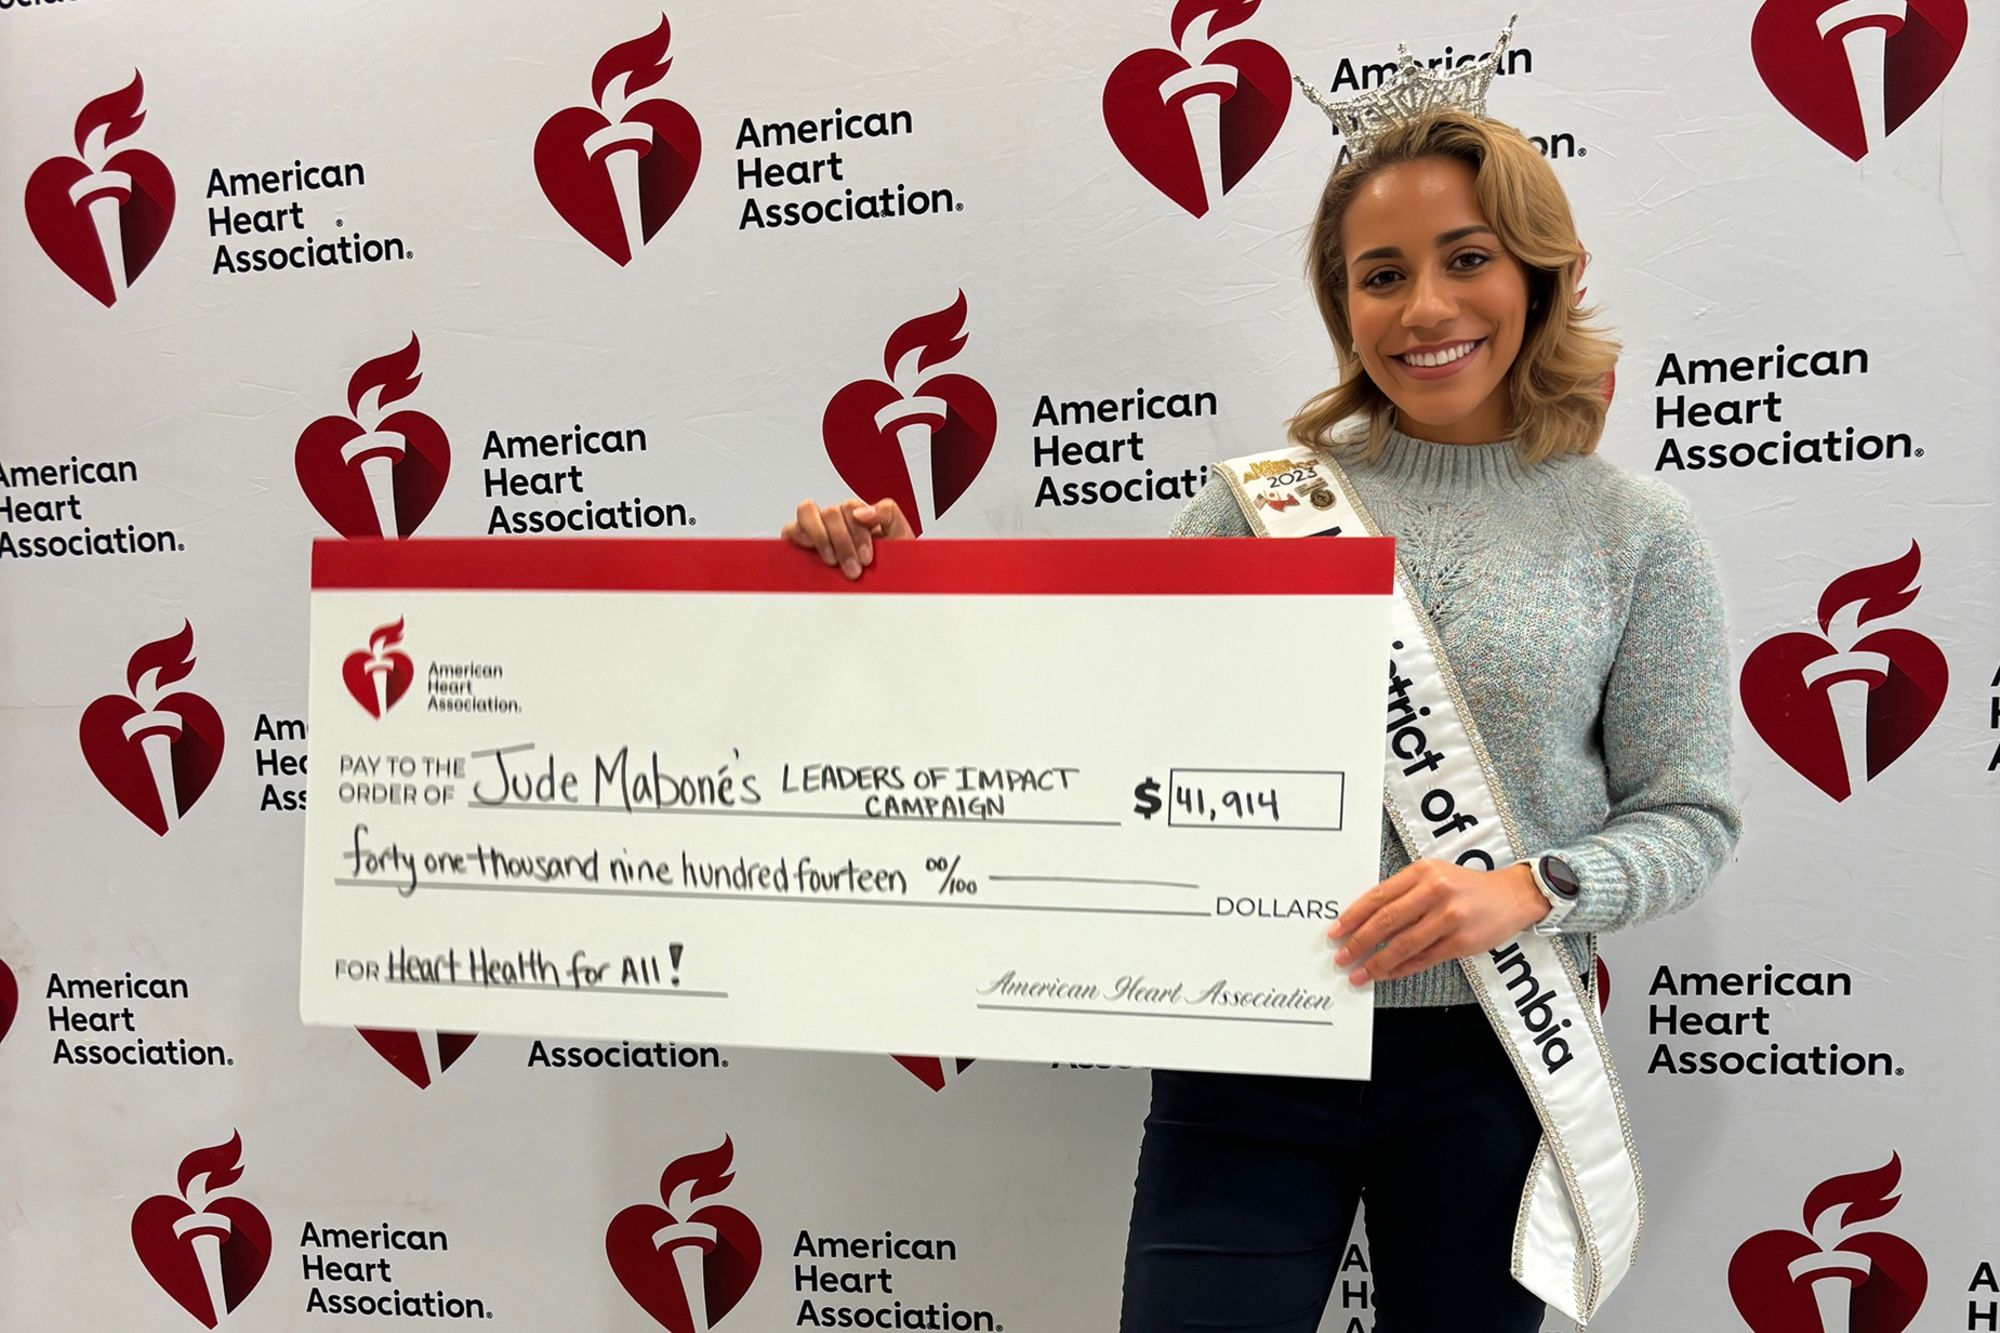 Jude Maboné, the current Miss District of Columbia, has led a team that raised $41,914 for the American Heart Association and was named the Greater Washington Region's Leader of Impact in 2023.